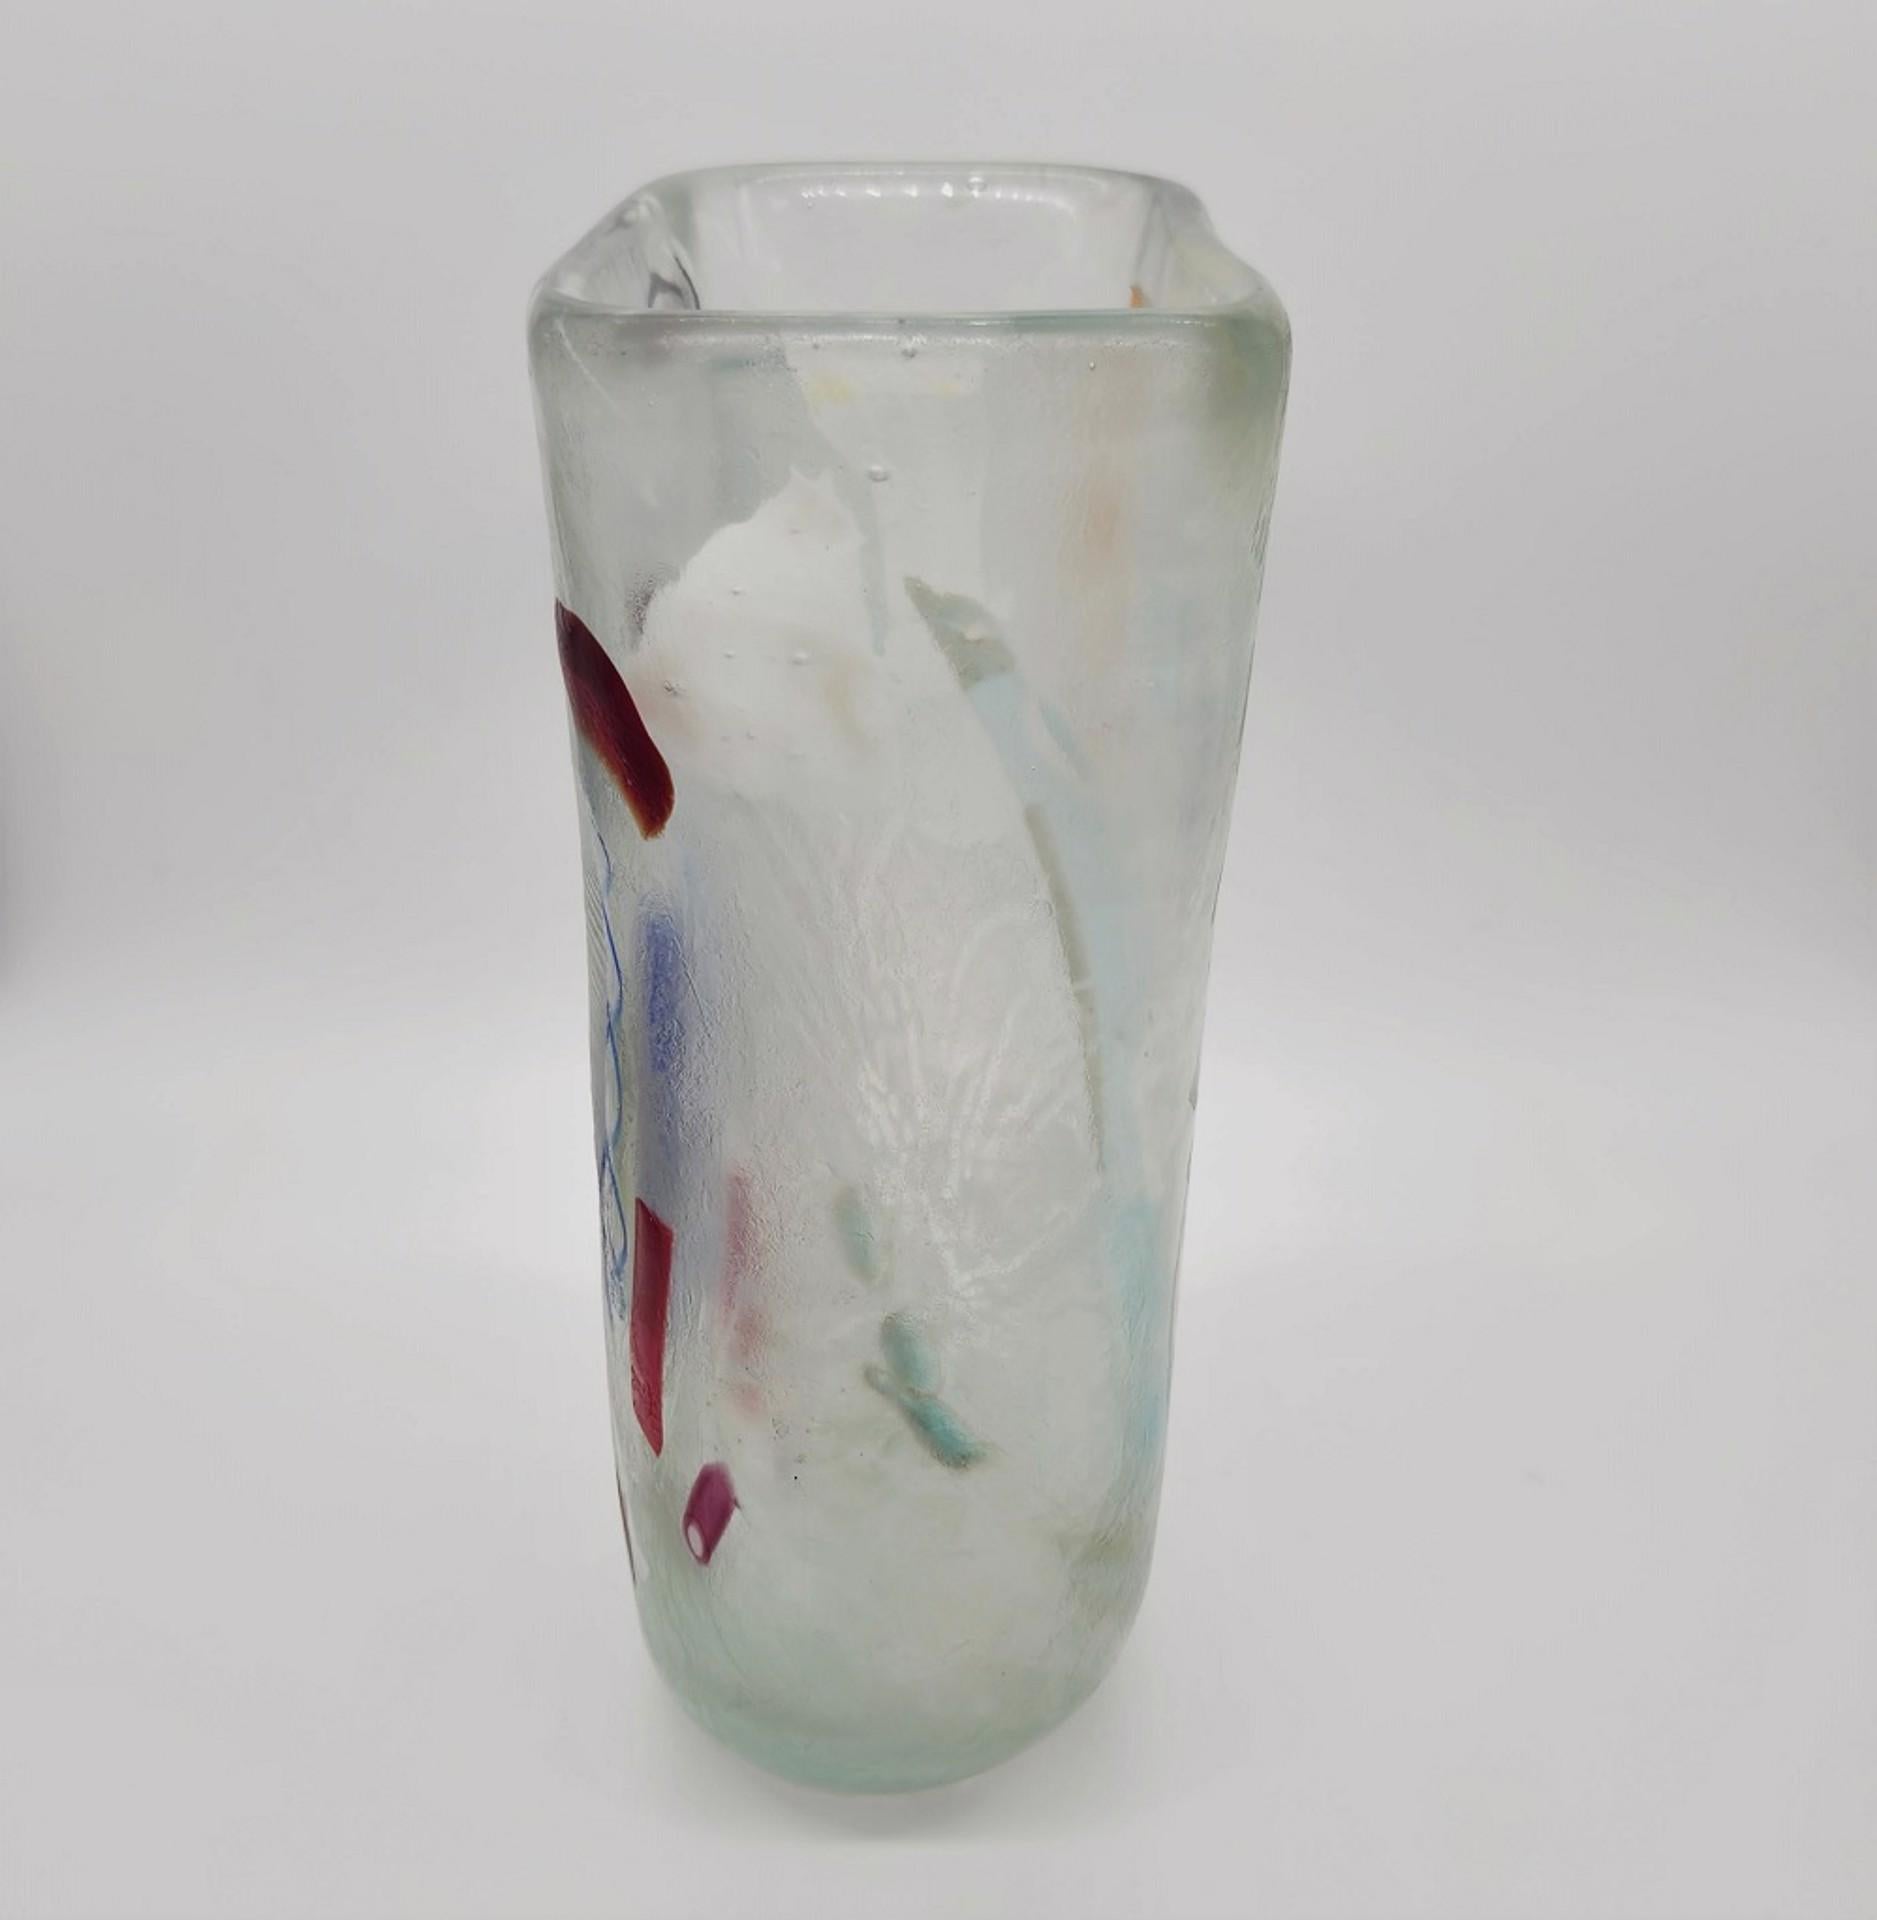 Original Murano glass vase with inclusions of avventurina, (a mixture of glass and copper), colorful glass rods and other patches, Angelo Rinaldi, Murano 1975.
Etched surface.
It wears an old label from an Italian Art Show (1994).
Signed and